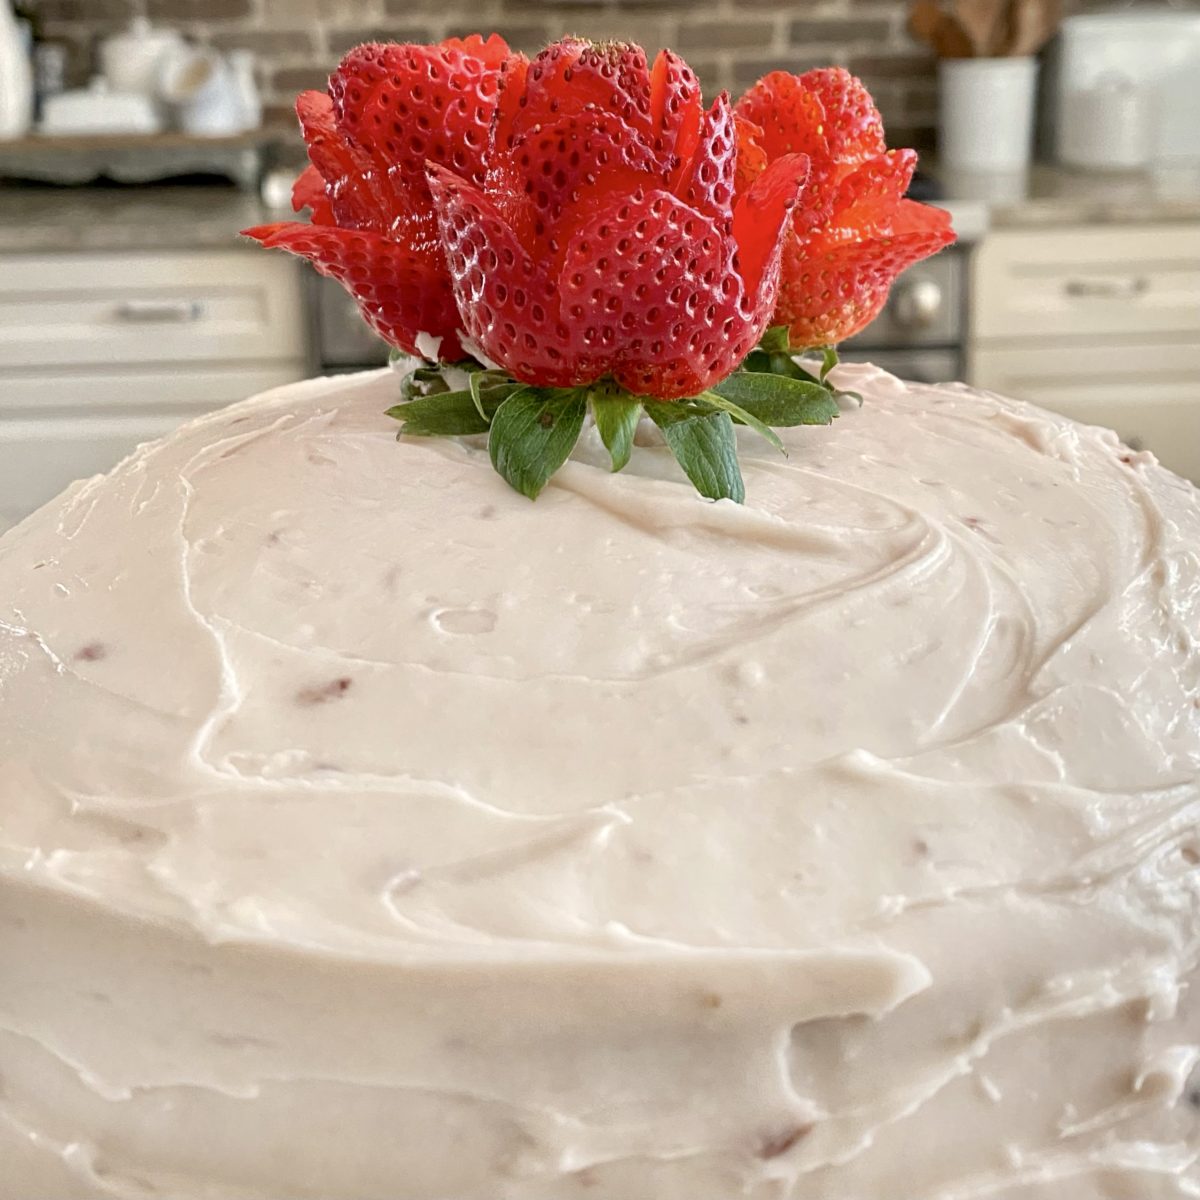 Strawberry roses on top of the cake in the frosting.